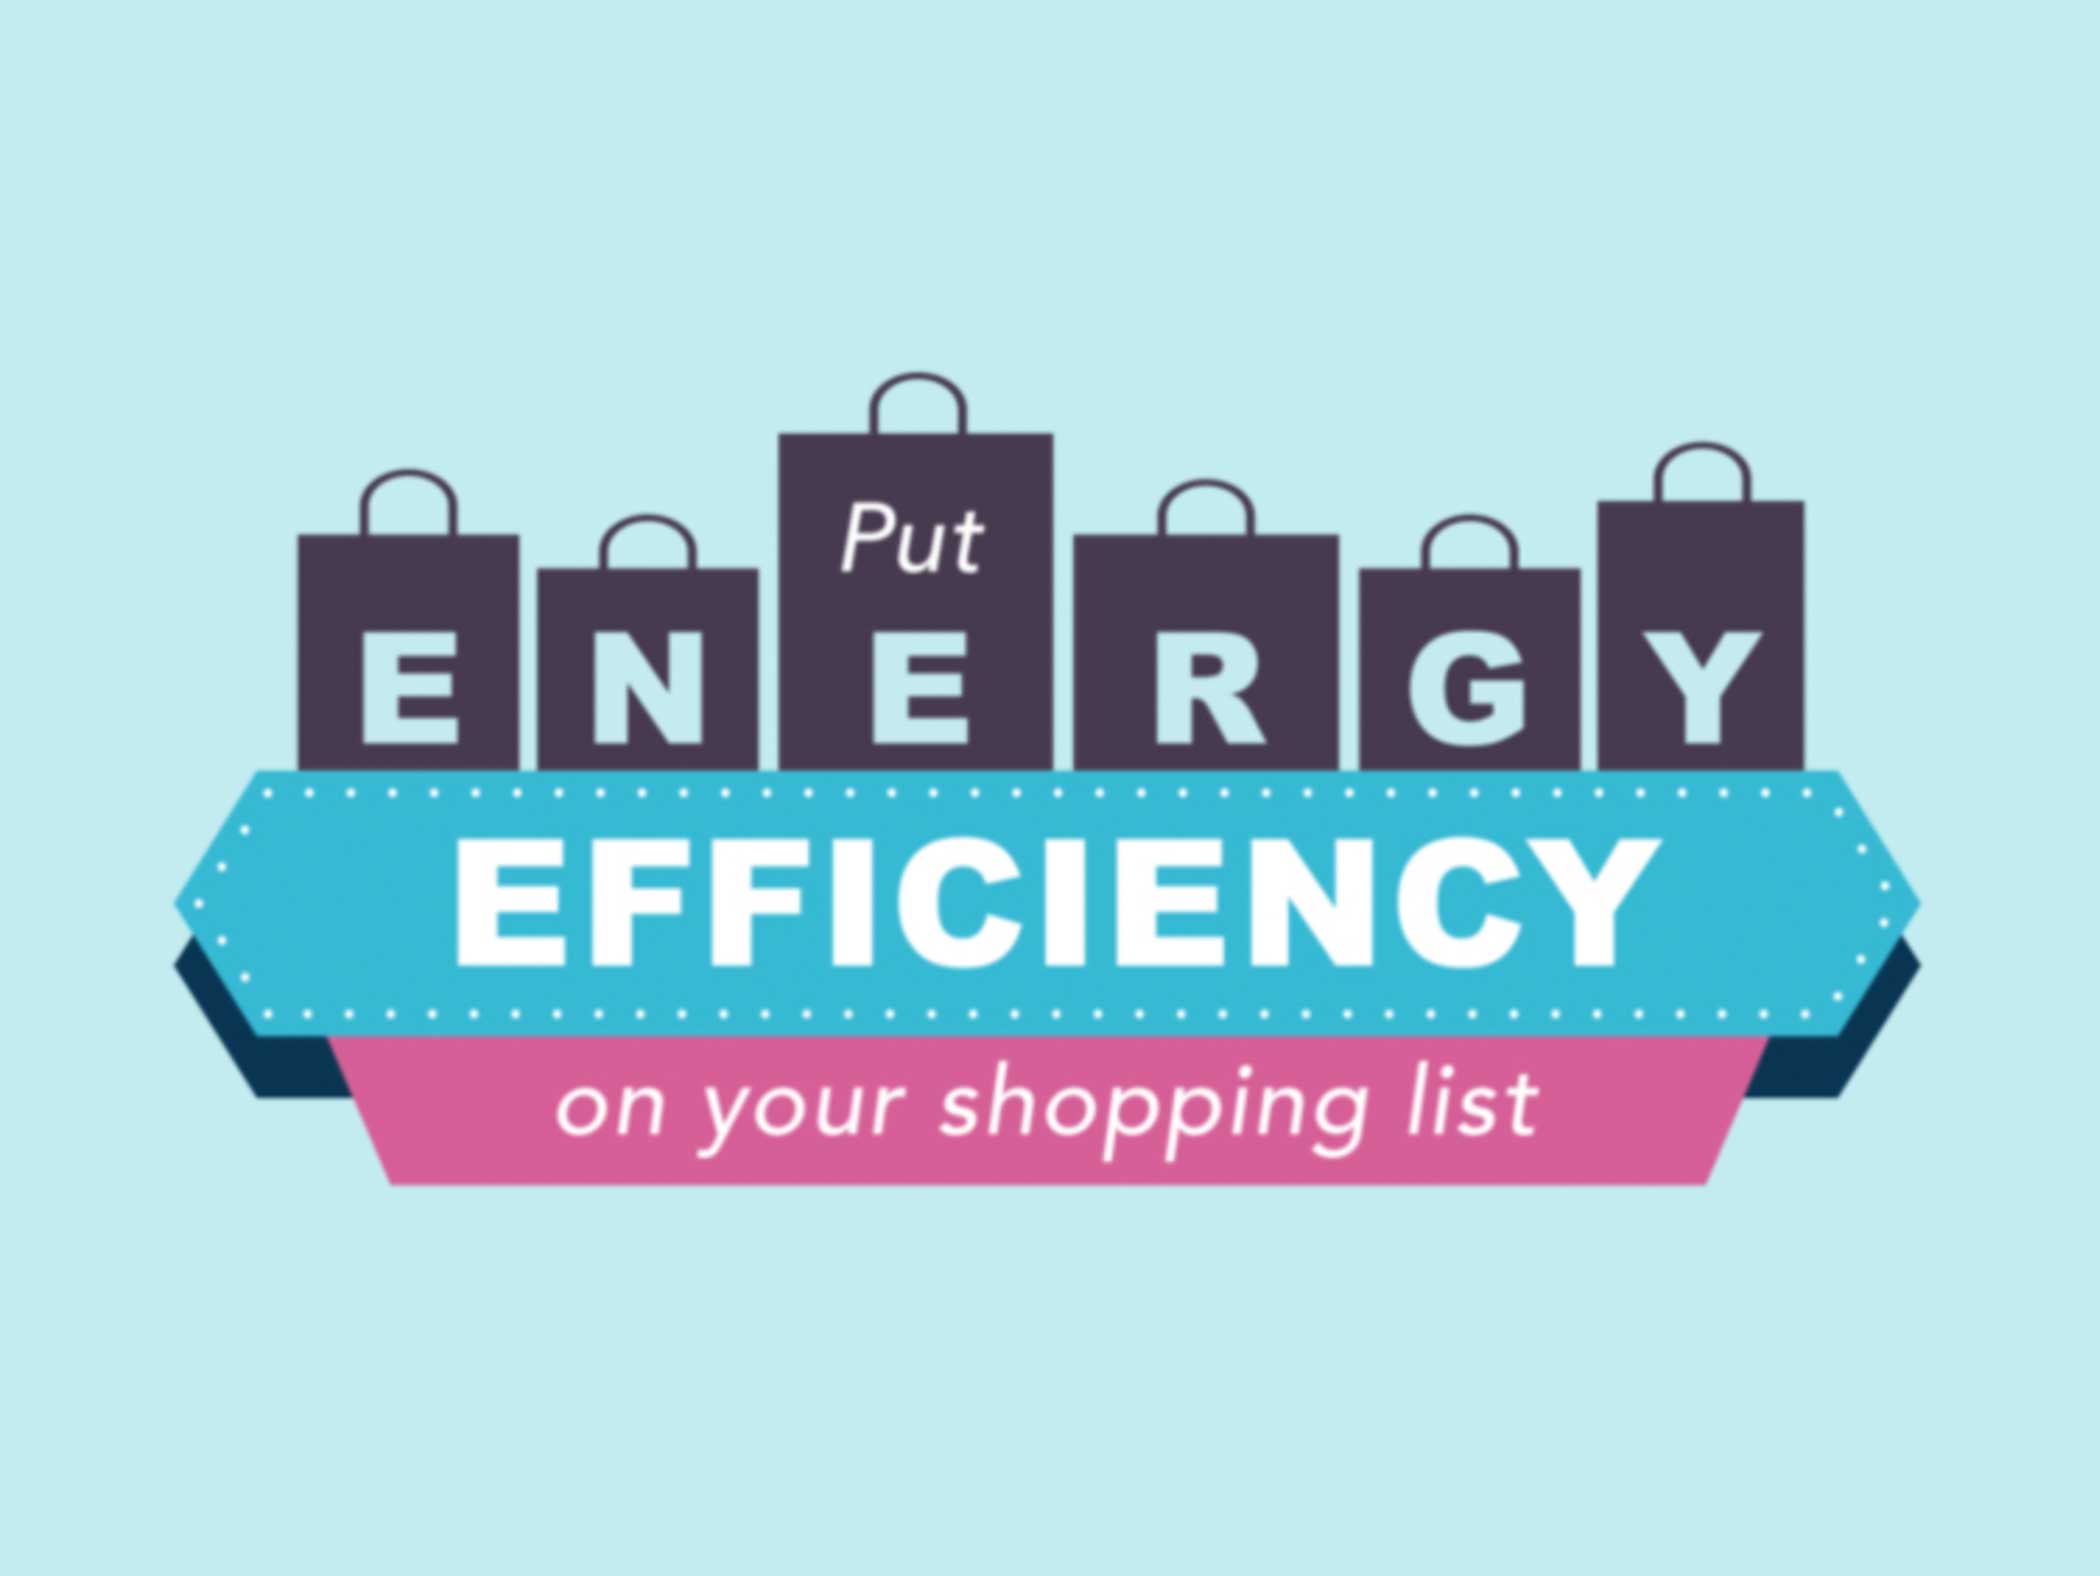 Your-Energy-Efficiency-Shopping-List